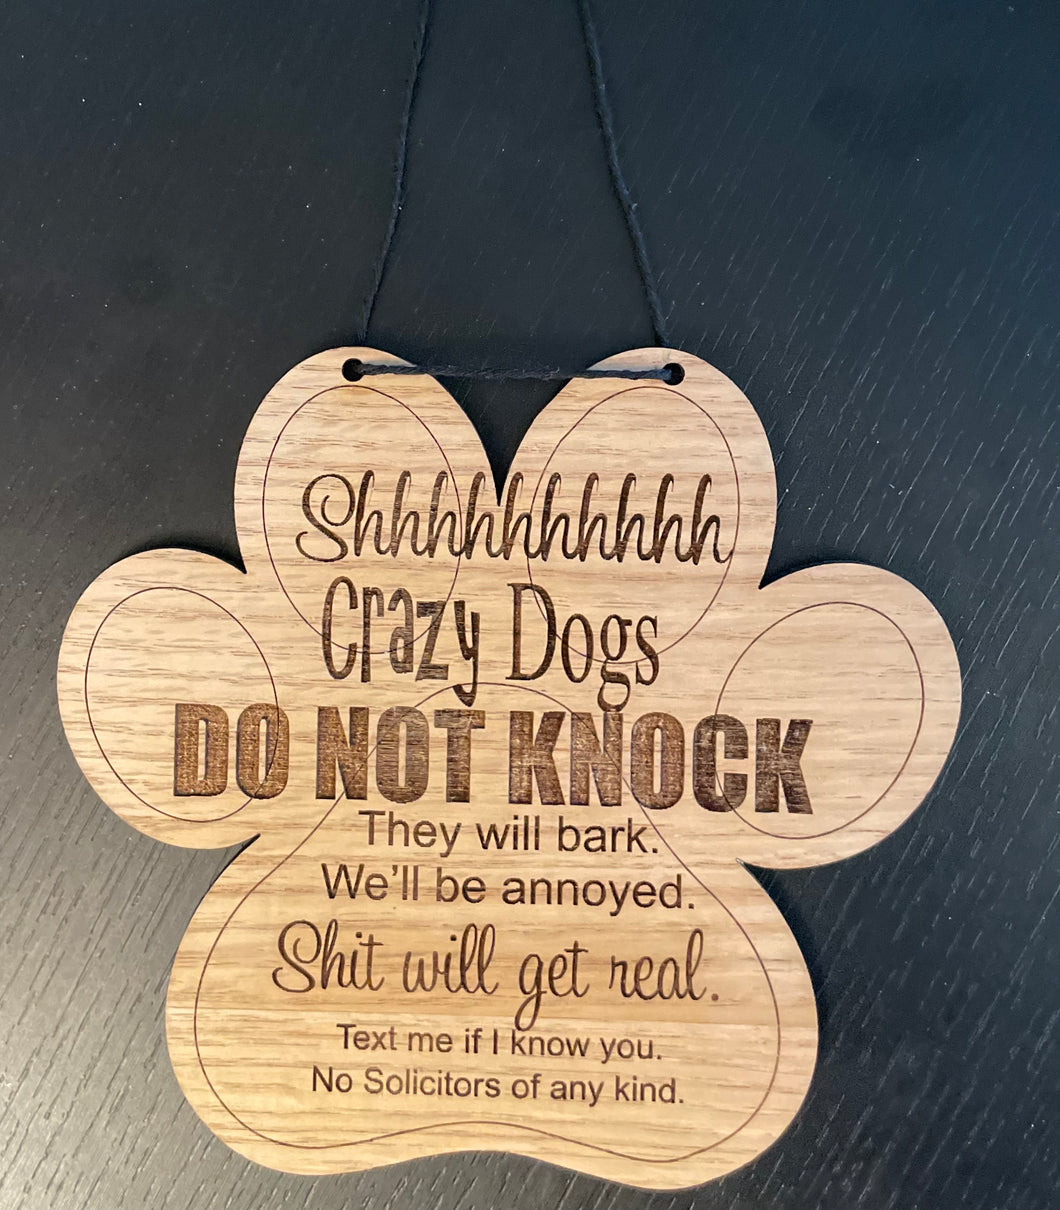 Small Crazy Dogs Sign - Shhhh...